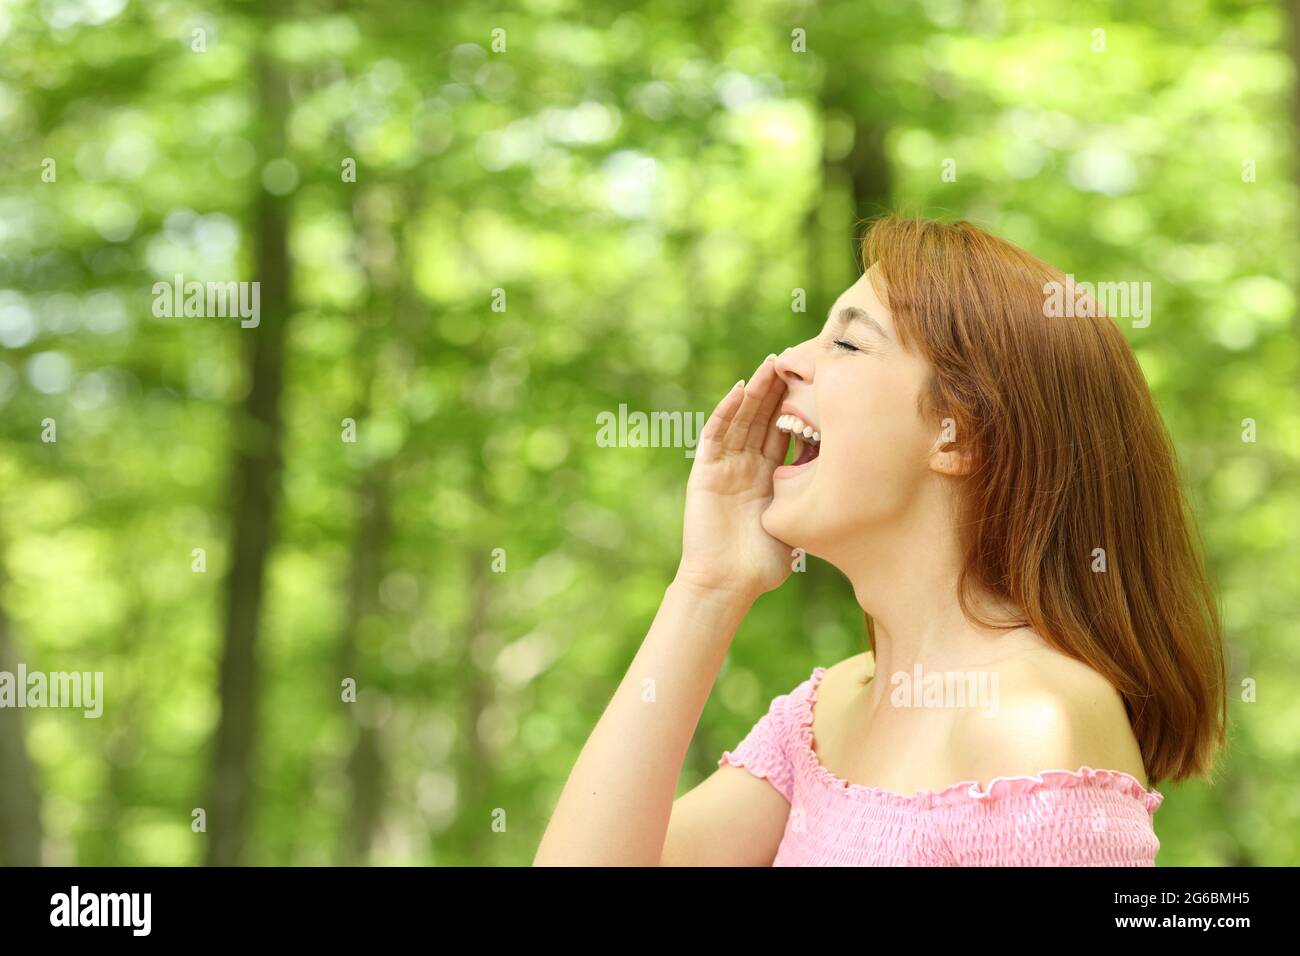 Side view portrait of a woman shouting loud in a forest Stock Photo